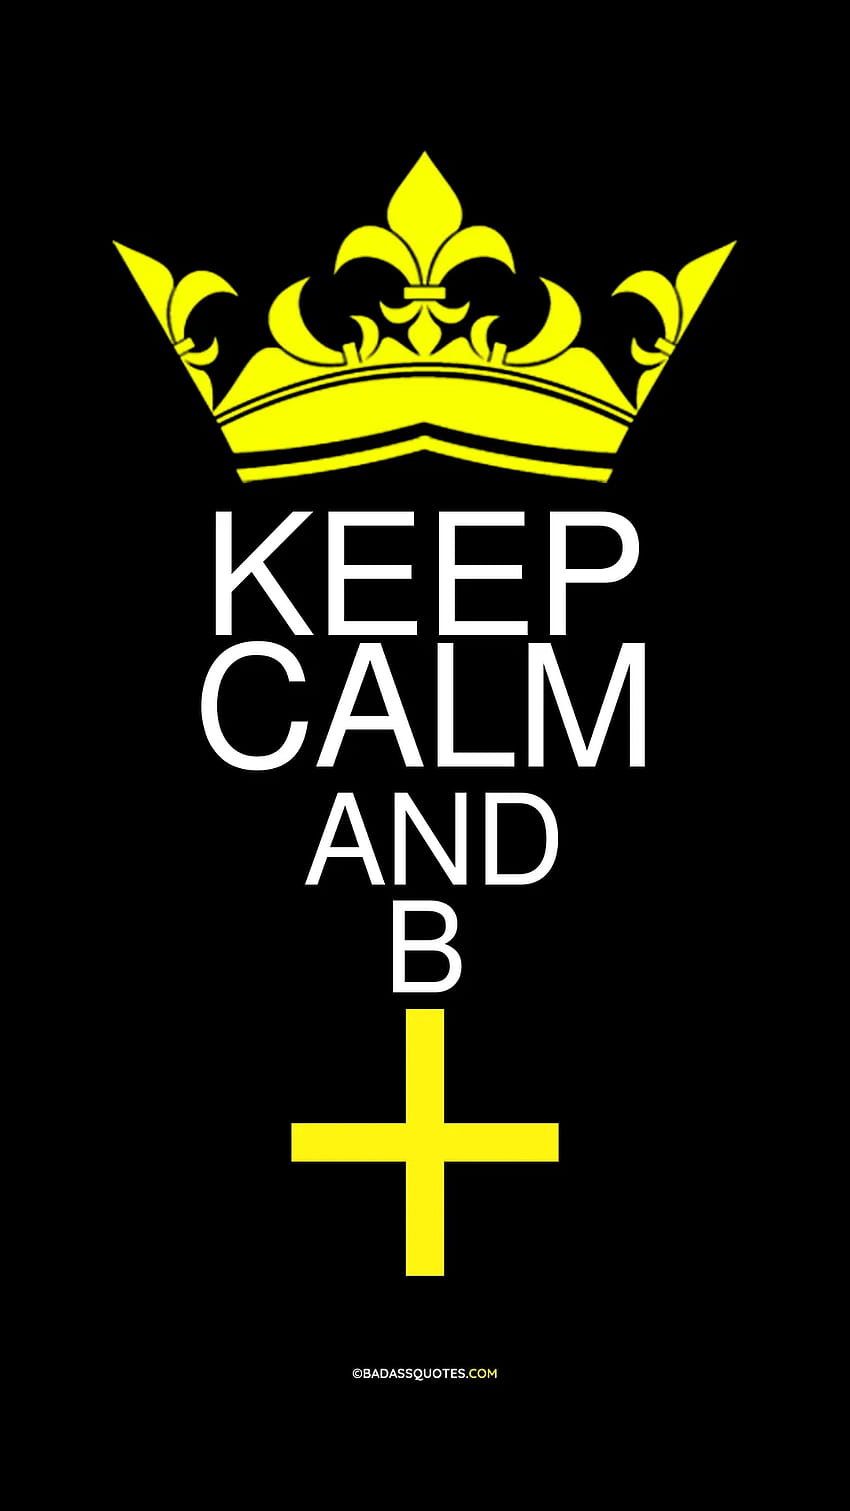 Keep Calm for IPhone & Android [With Quotes], keep calm quotes HD phone wallpaper